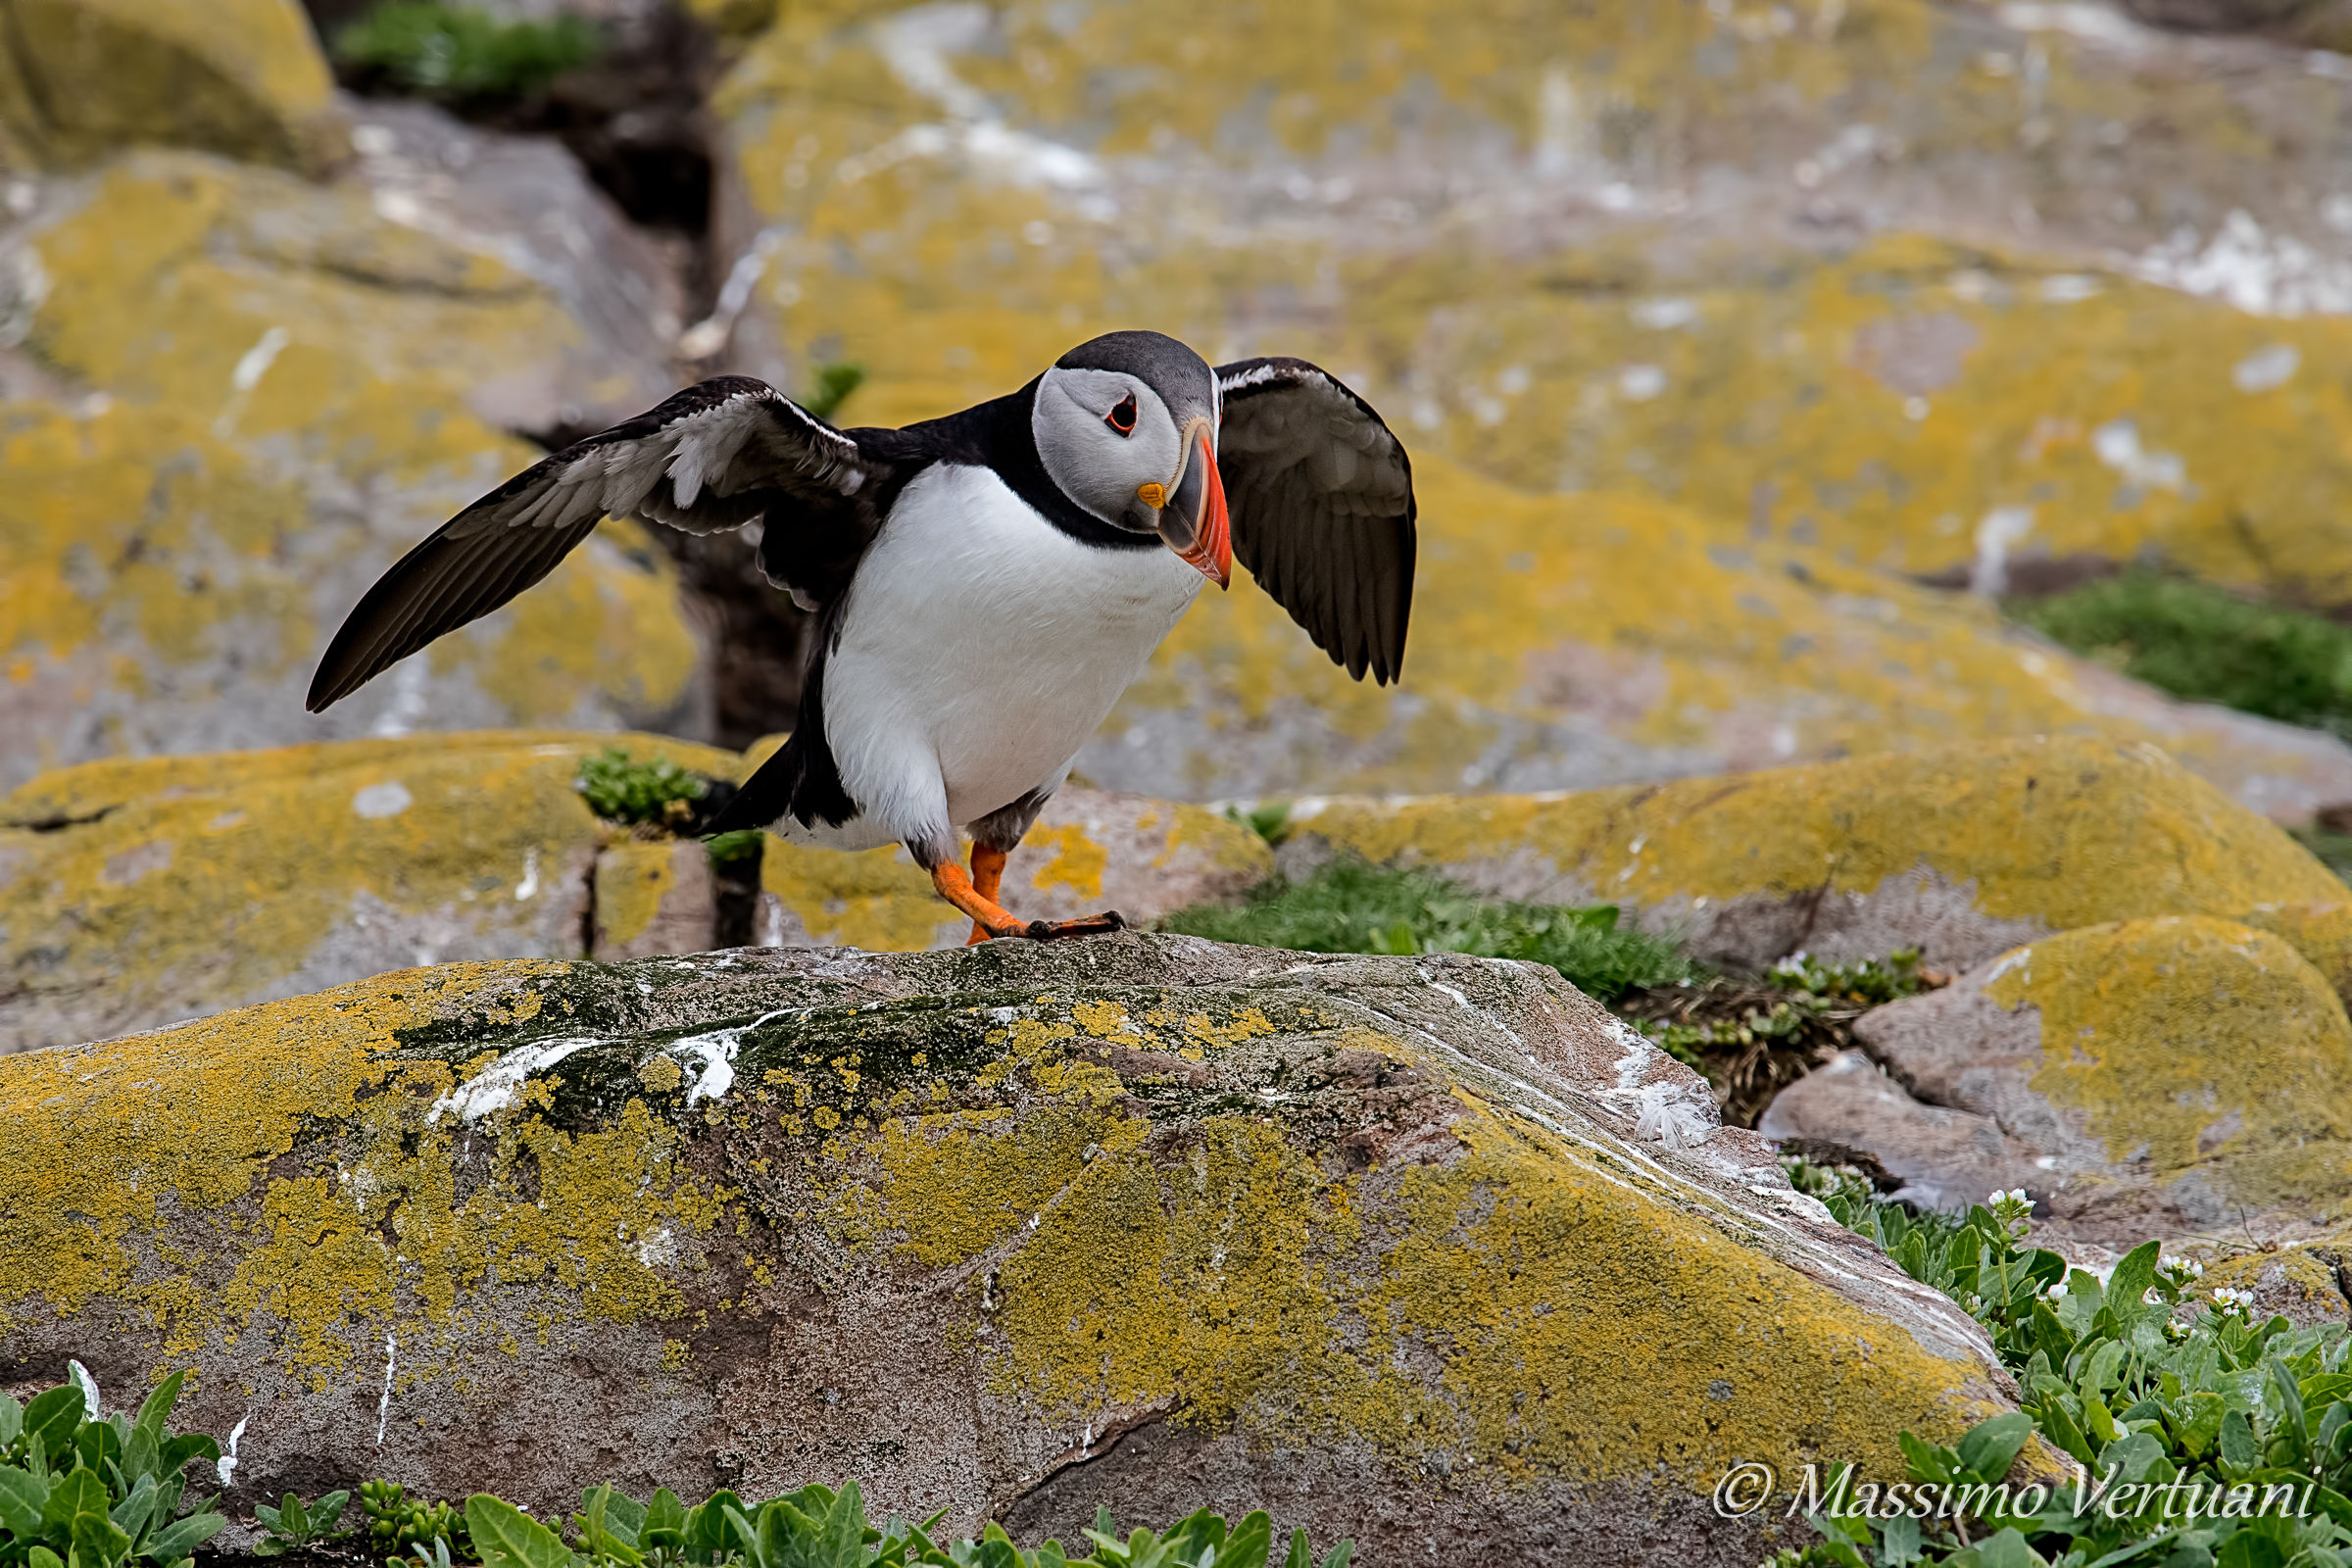 Puffin of the Sea ...